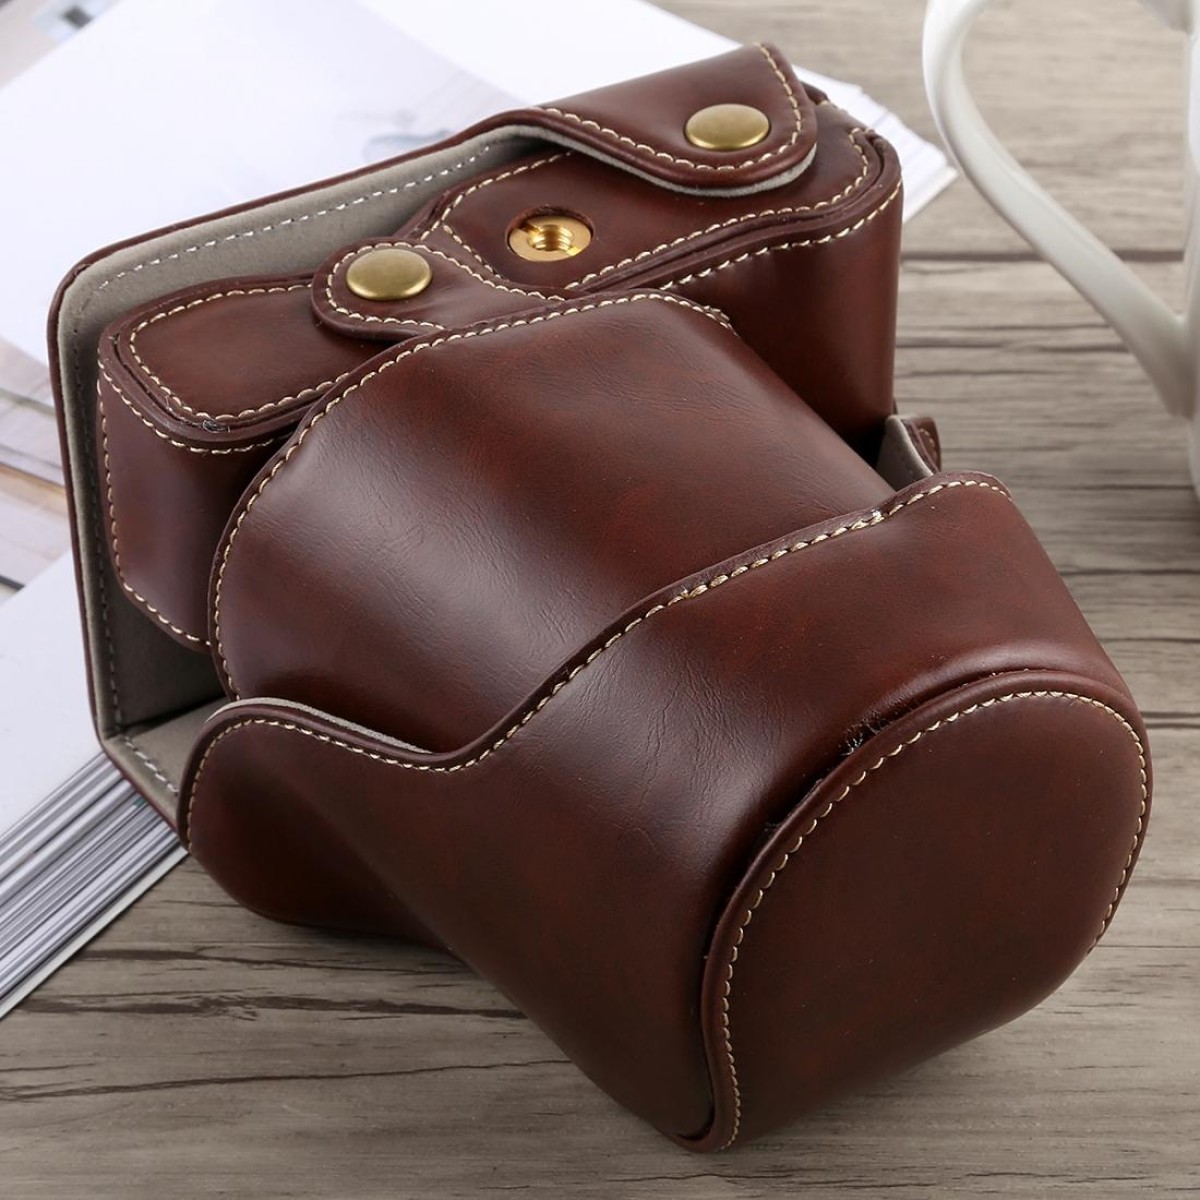 Full Body Camera PU Leather Case Bag with Strap for Fujifilm X-A5 (Coffee)